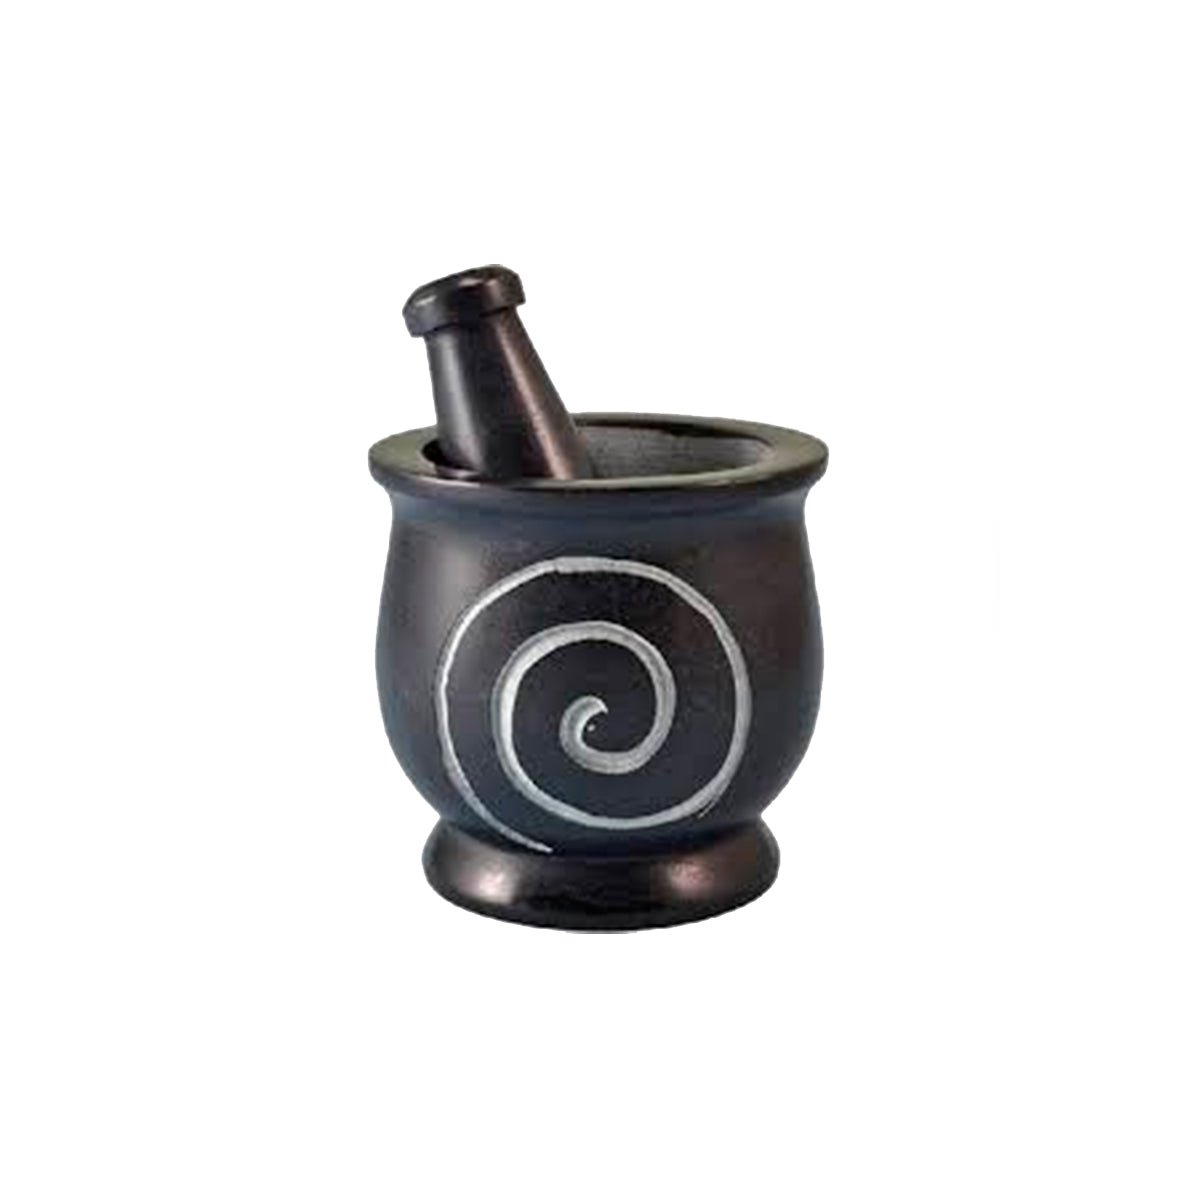 Spiral Mortar and Pestle, 3 inch - 13 Moons